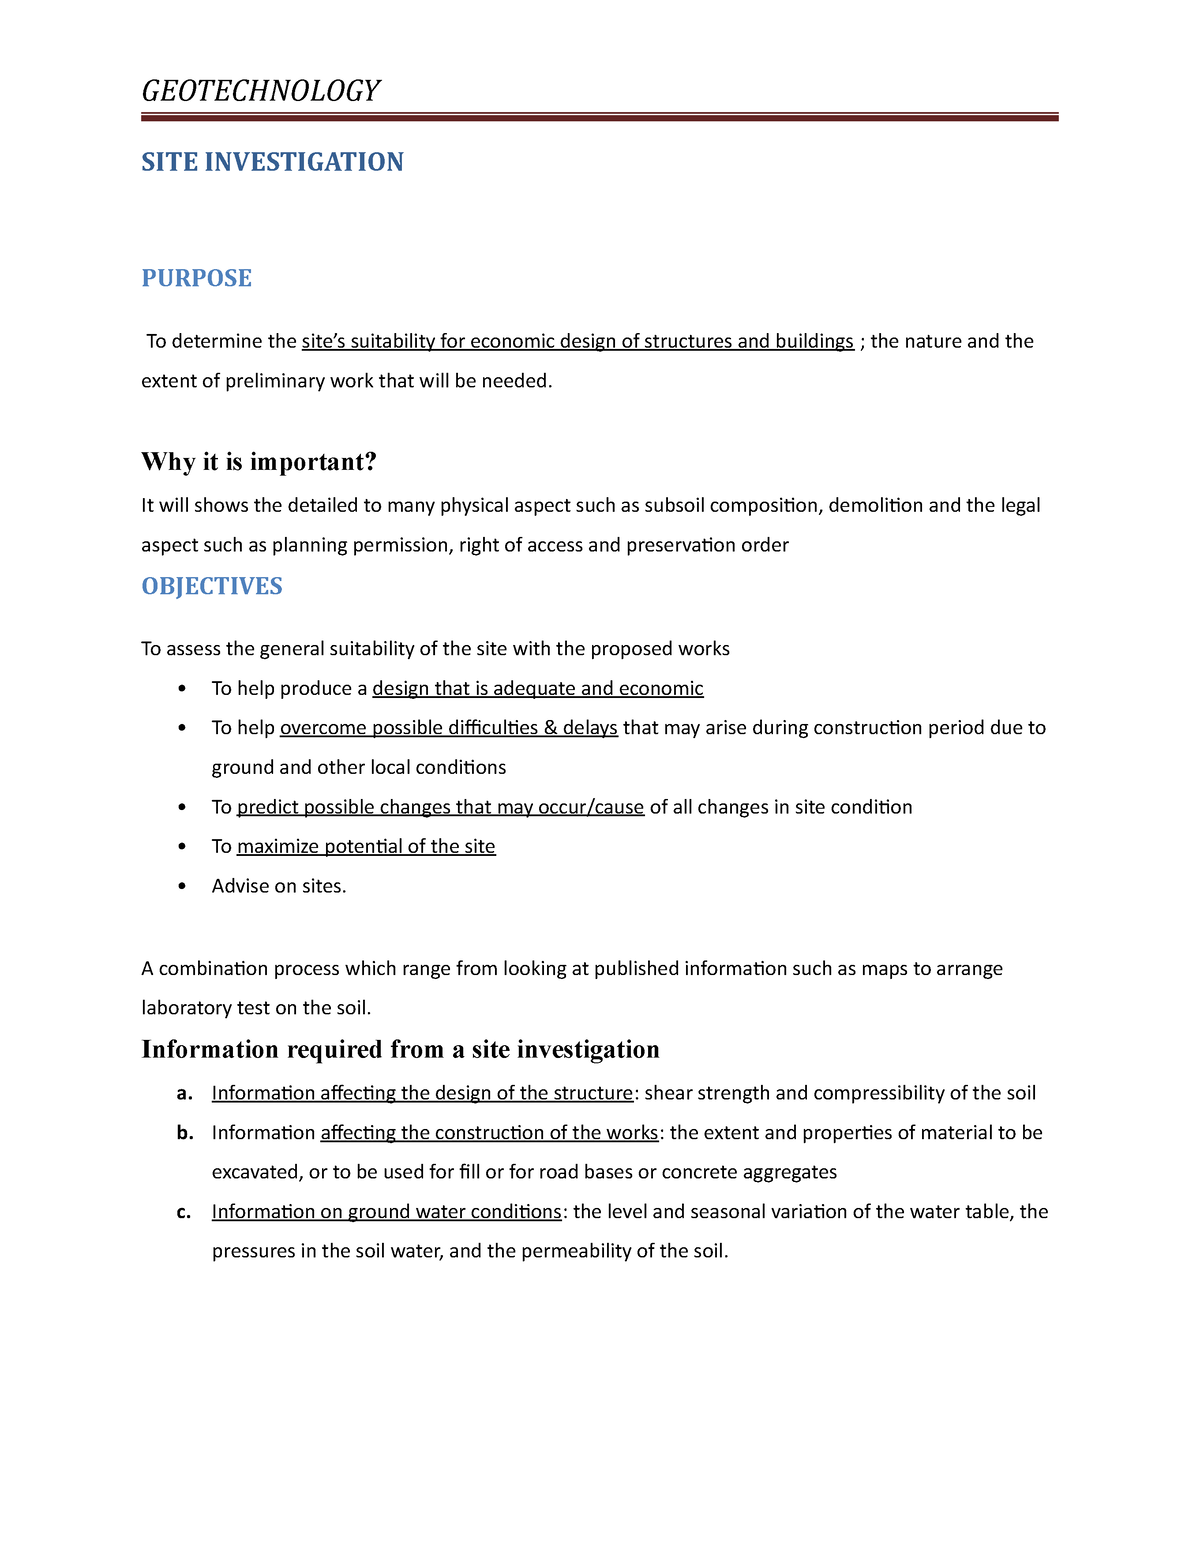 Geotech 1 Site investigation Notes - SITE INVESTIGATION PURPOSE To ...